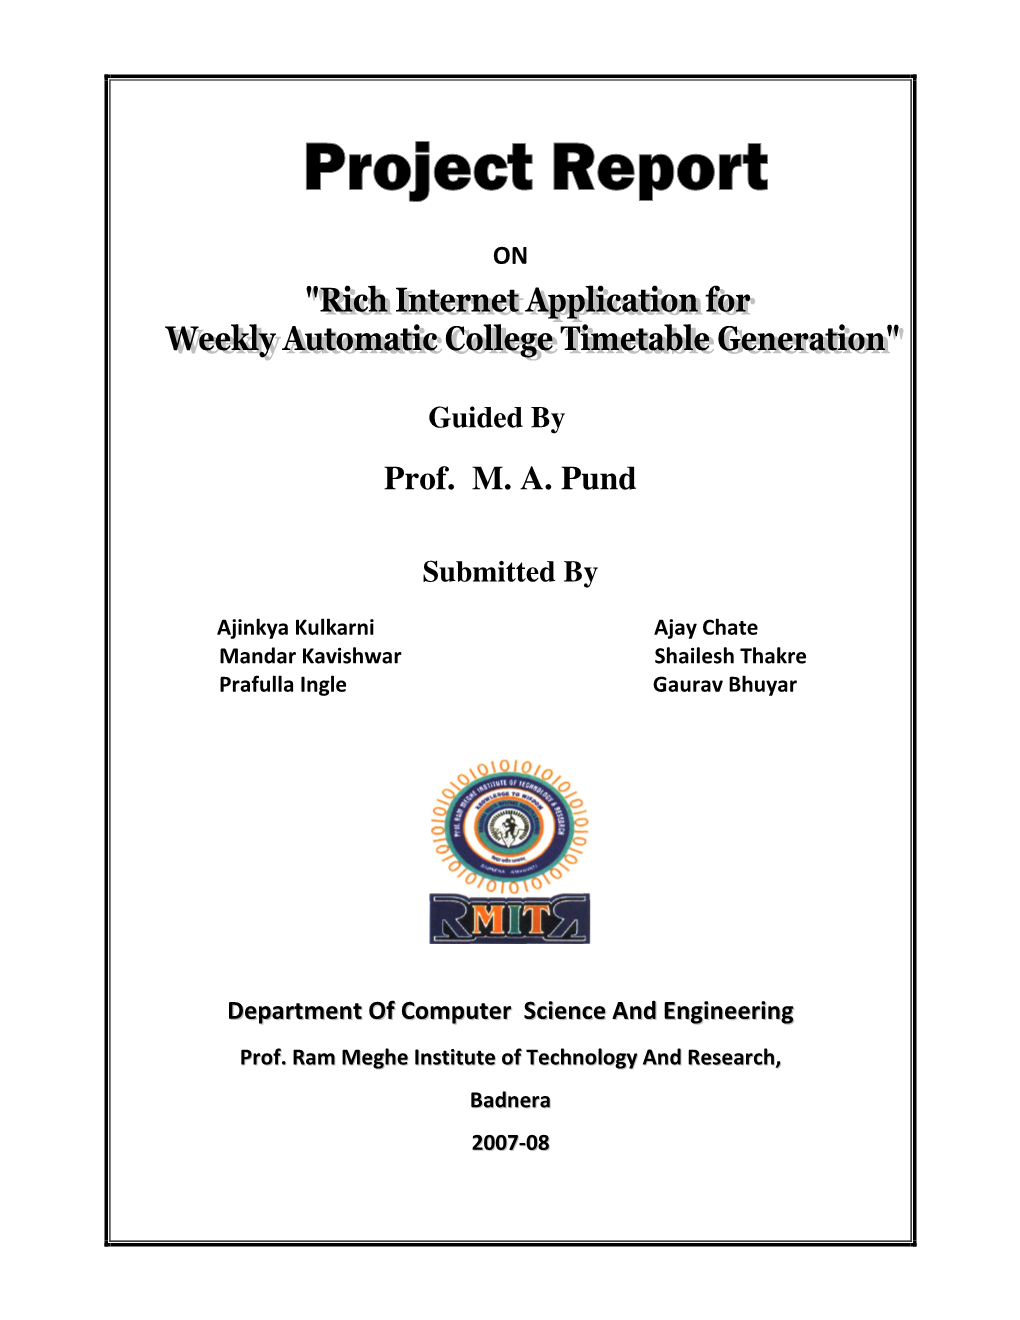 Project Report on Rich Internet Application.Pdf